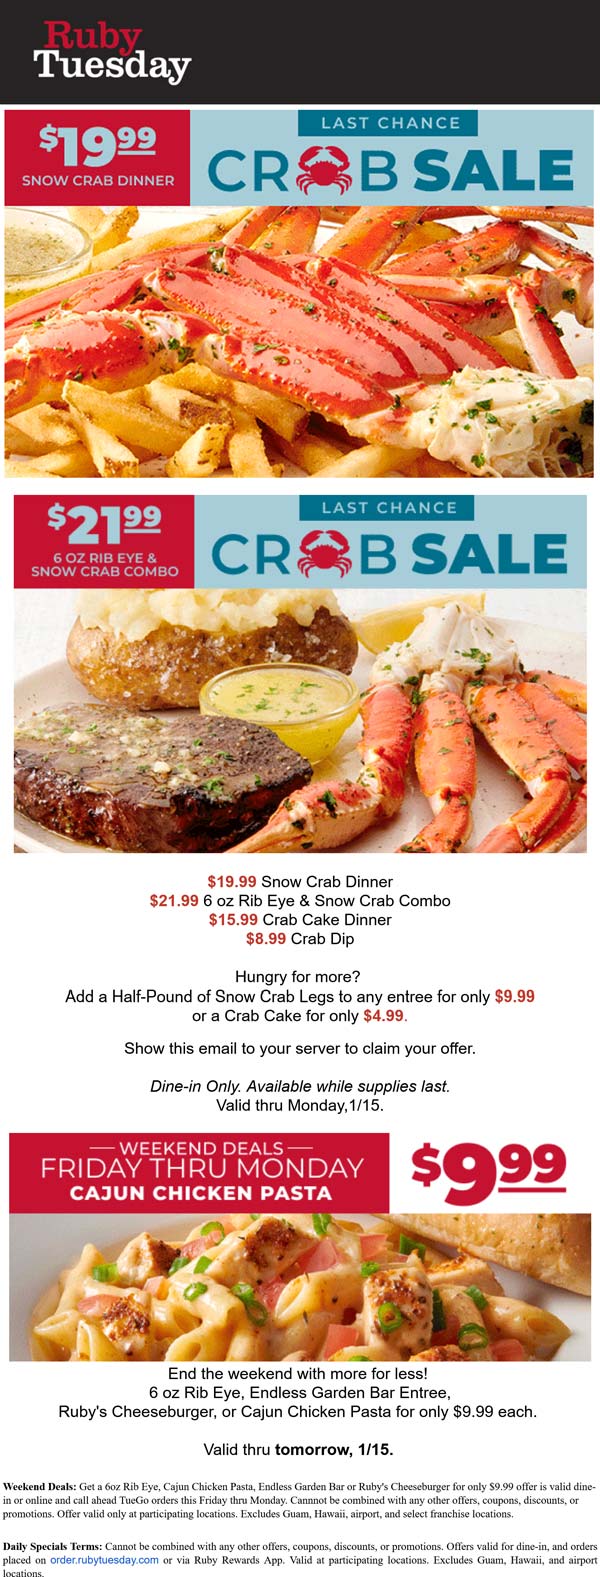 Ruby Tuesday restaurants Coupon  $20 snow crab dinner, $22 steak & crab + $10 bottomless garden bar at Ruby Tuesday #rubytuesday 